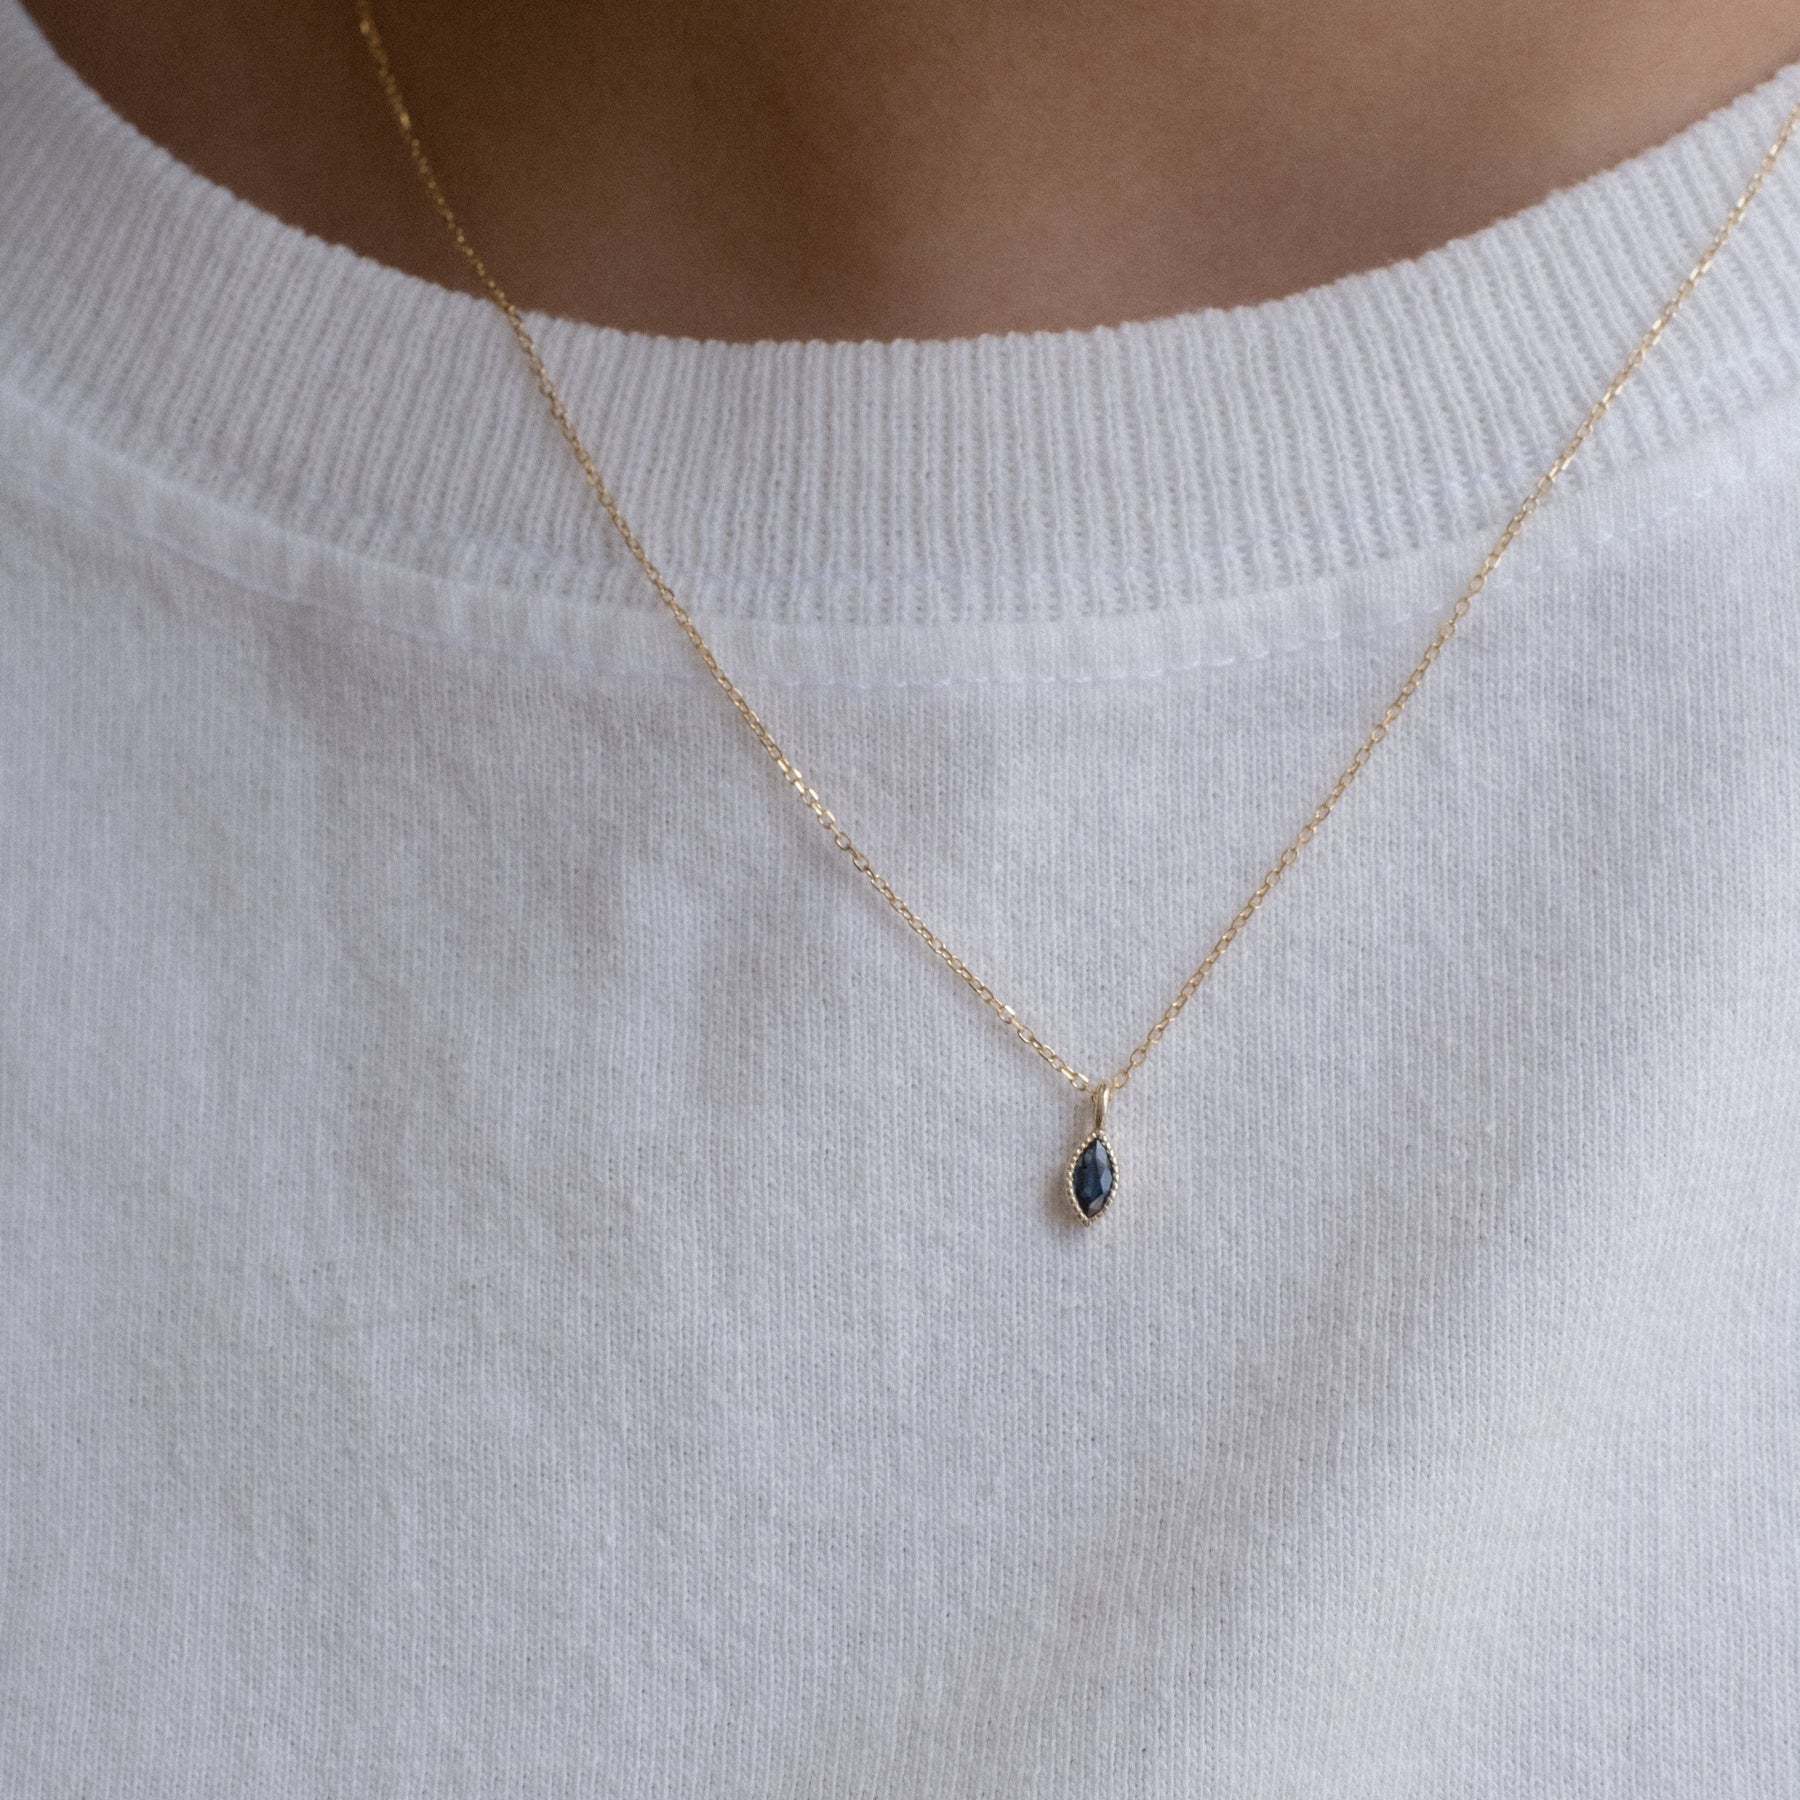 Marquise Blue Sapphire Wisp Necklace